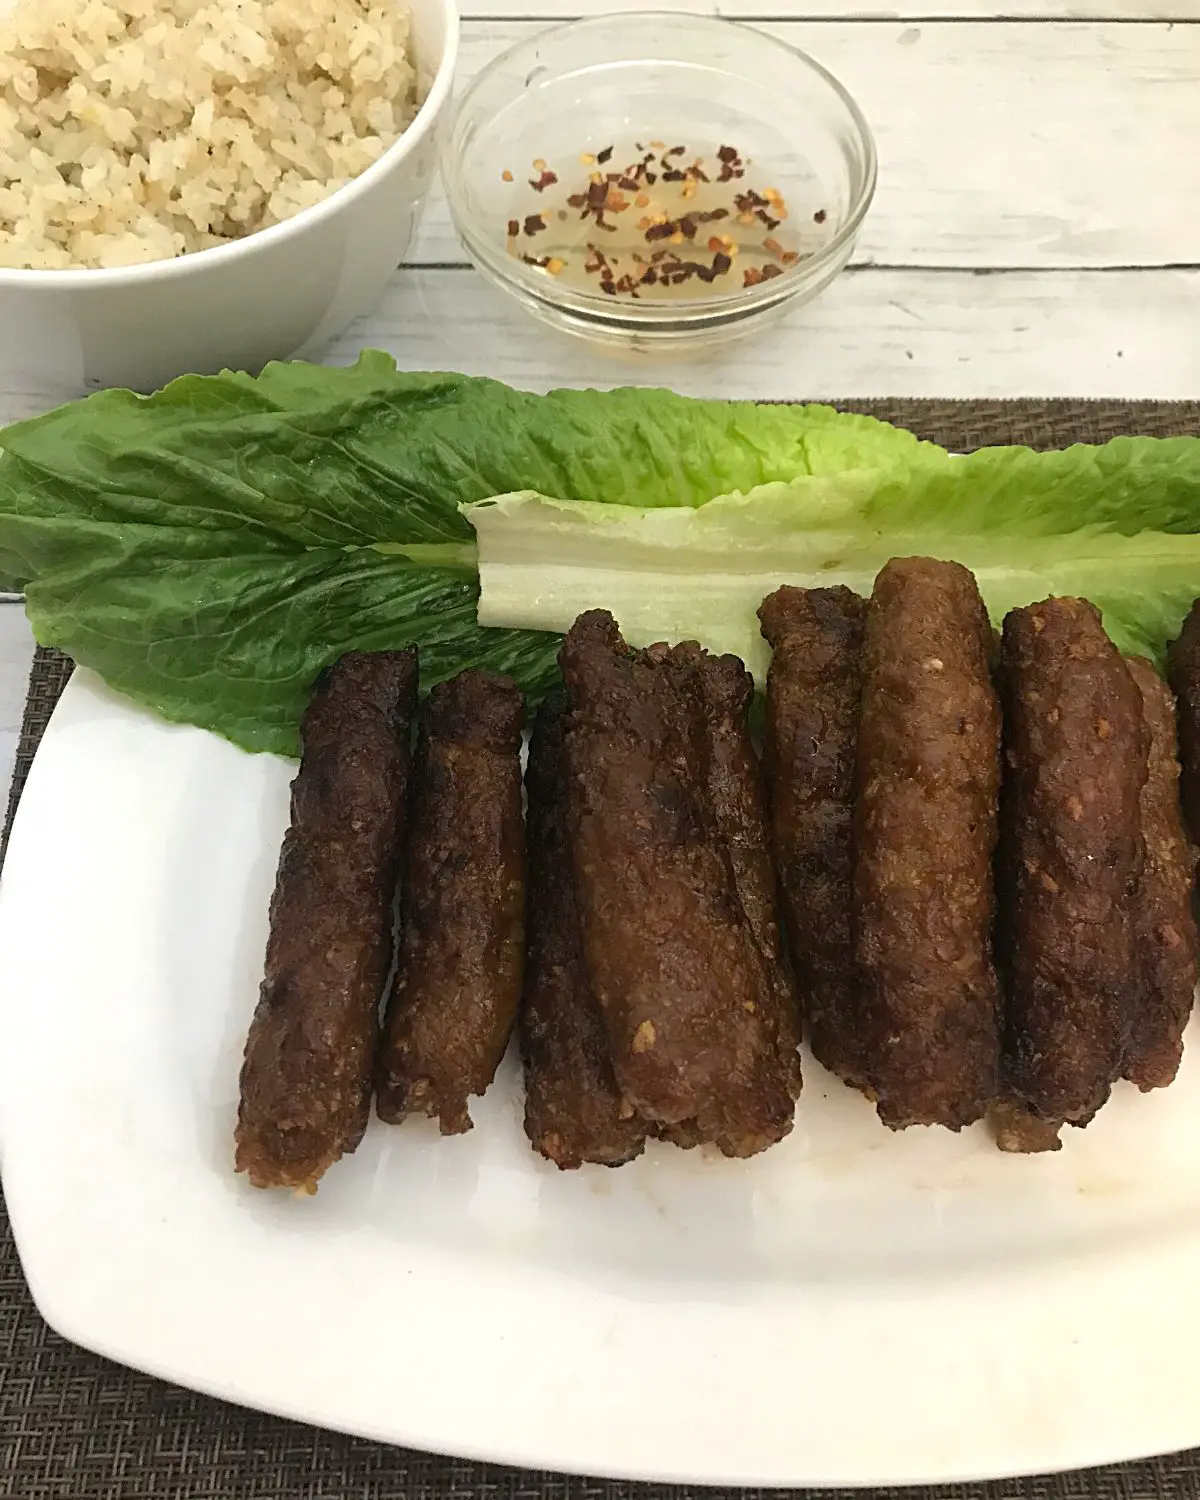 cooked filipino skinless longganisa sausage lined up in a serving plate